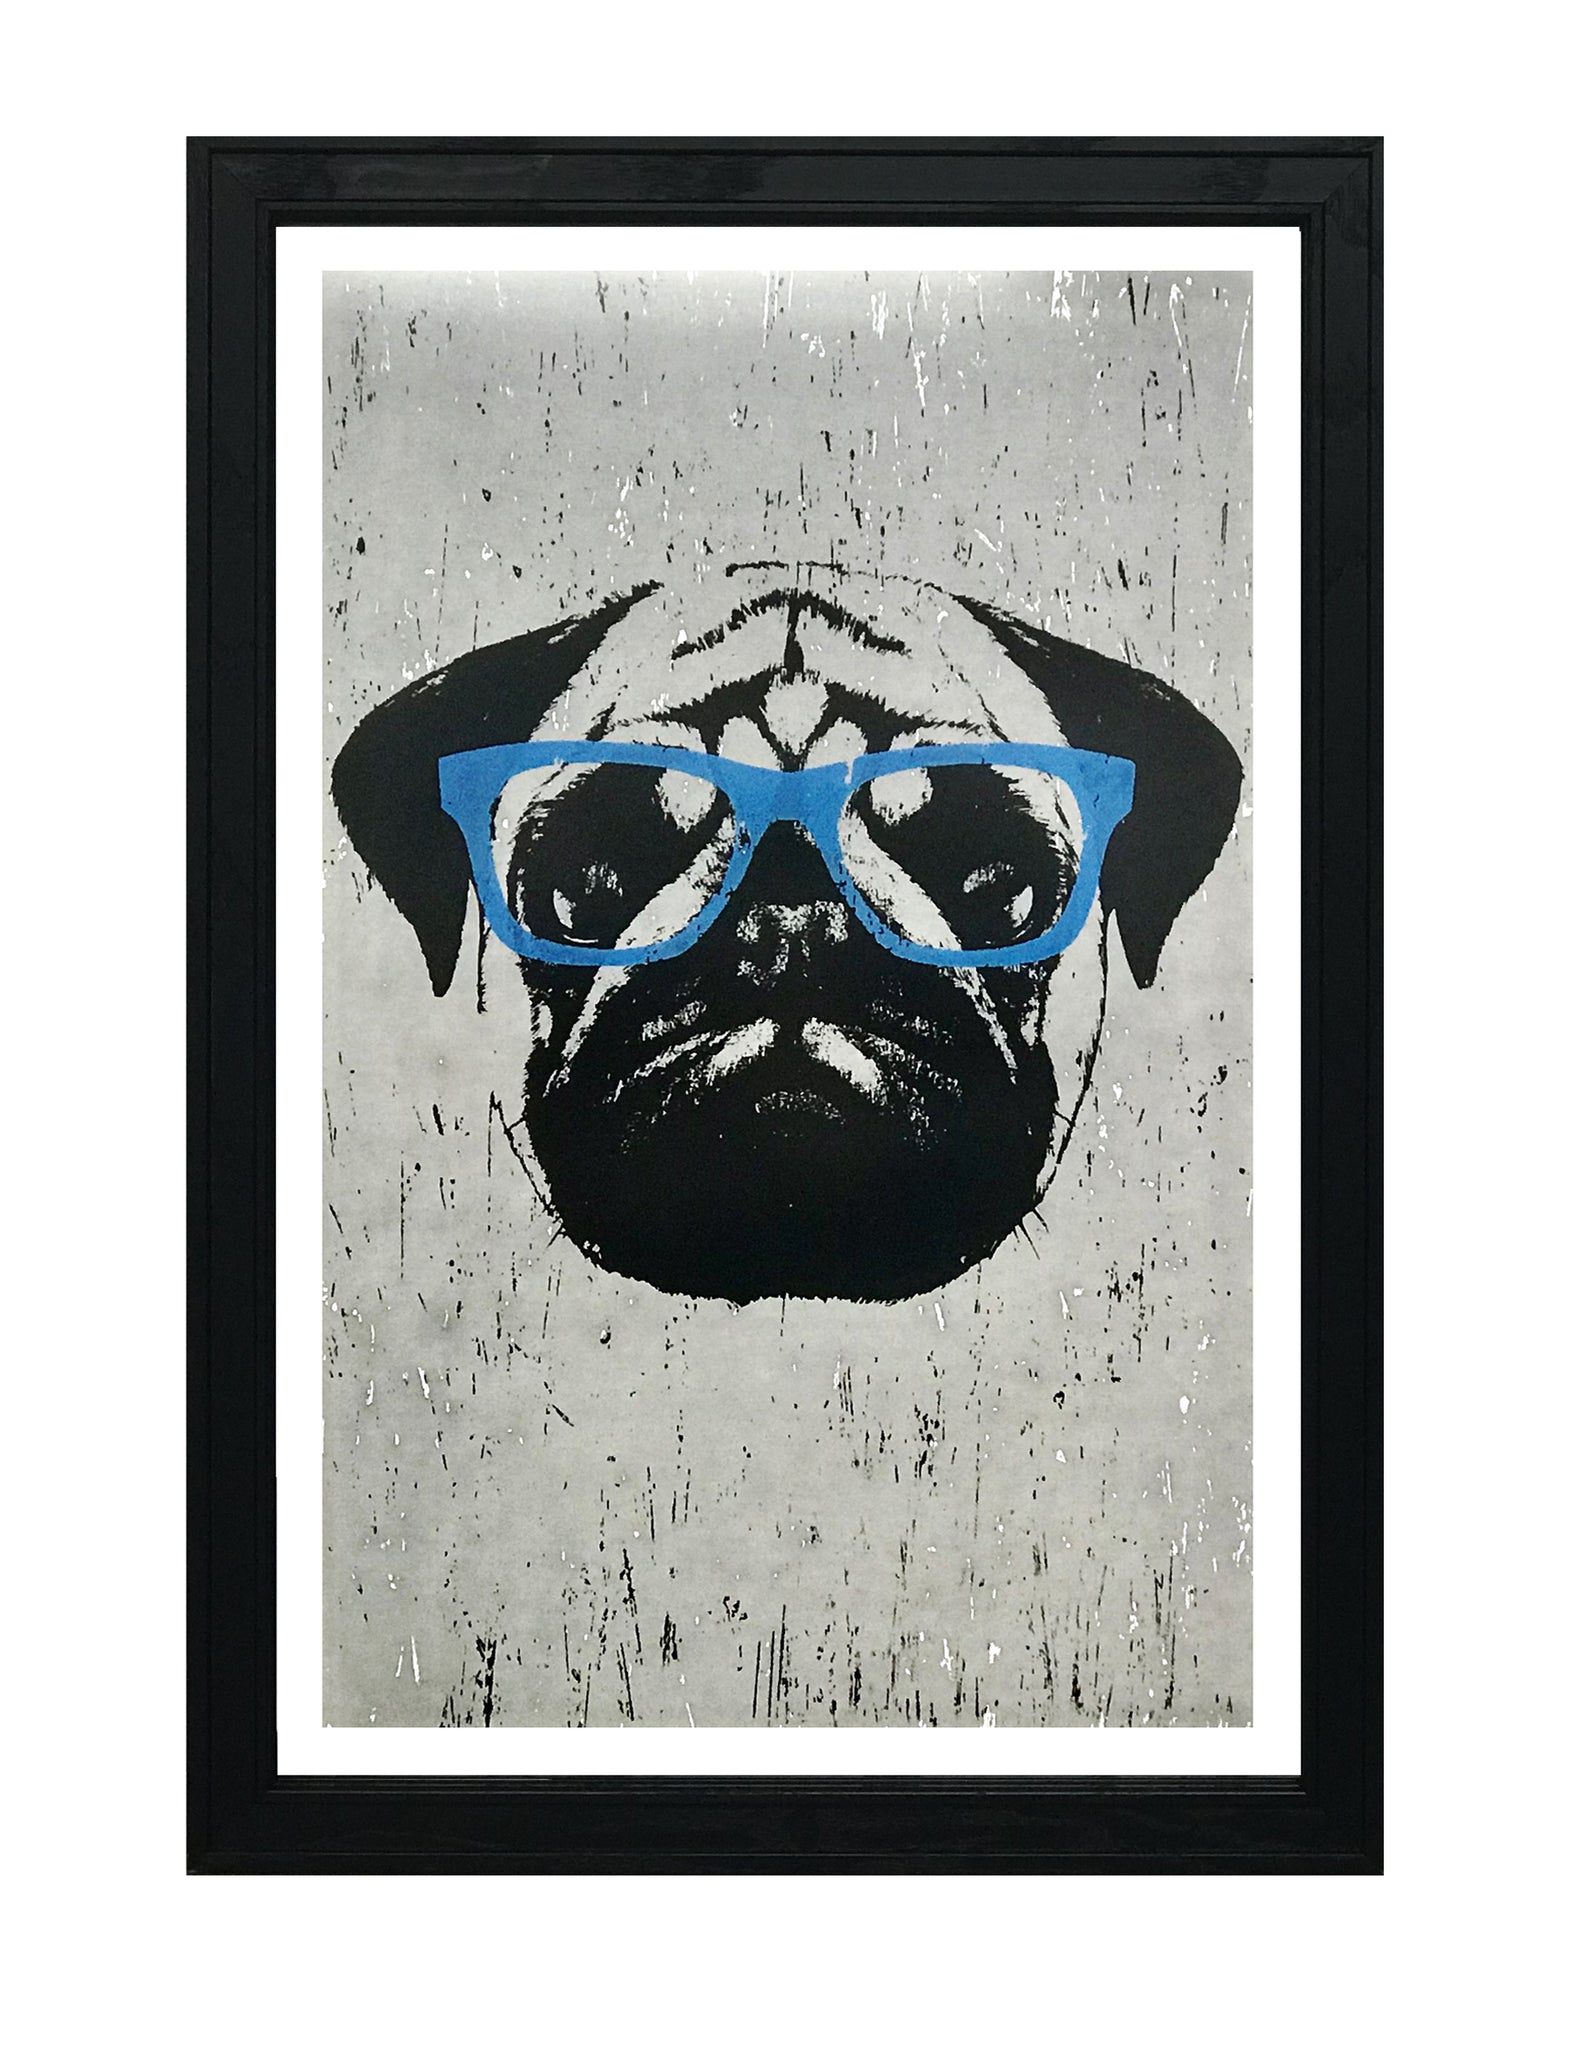 Limited Edition Pug Art Poster with Blue Glasses - 13x19